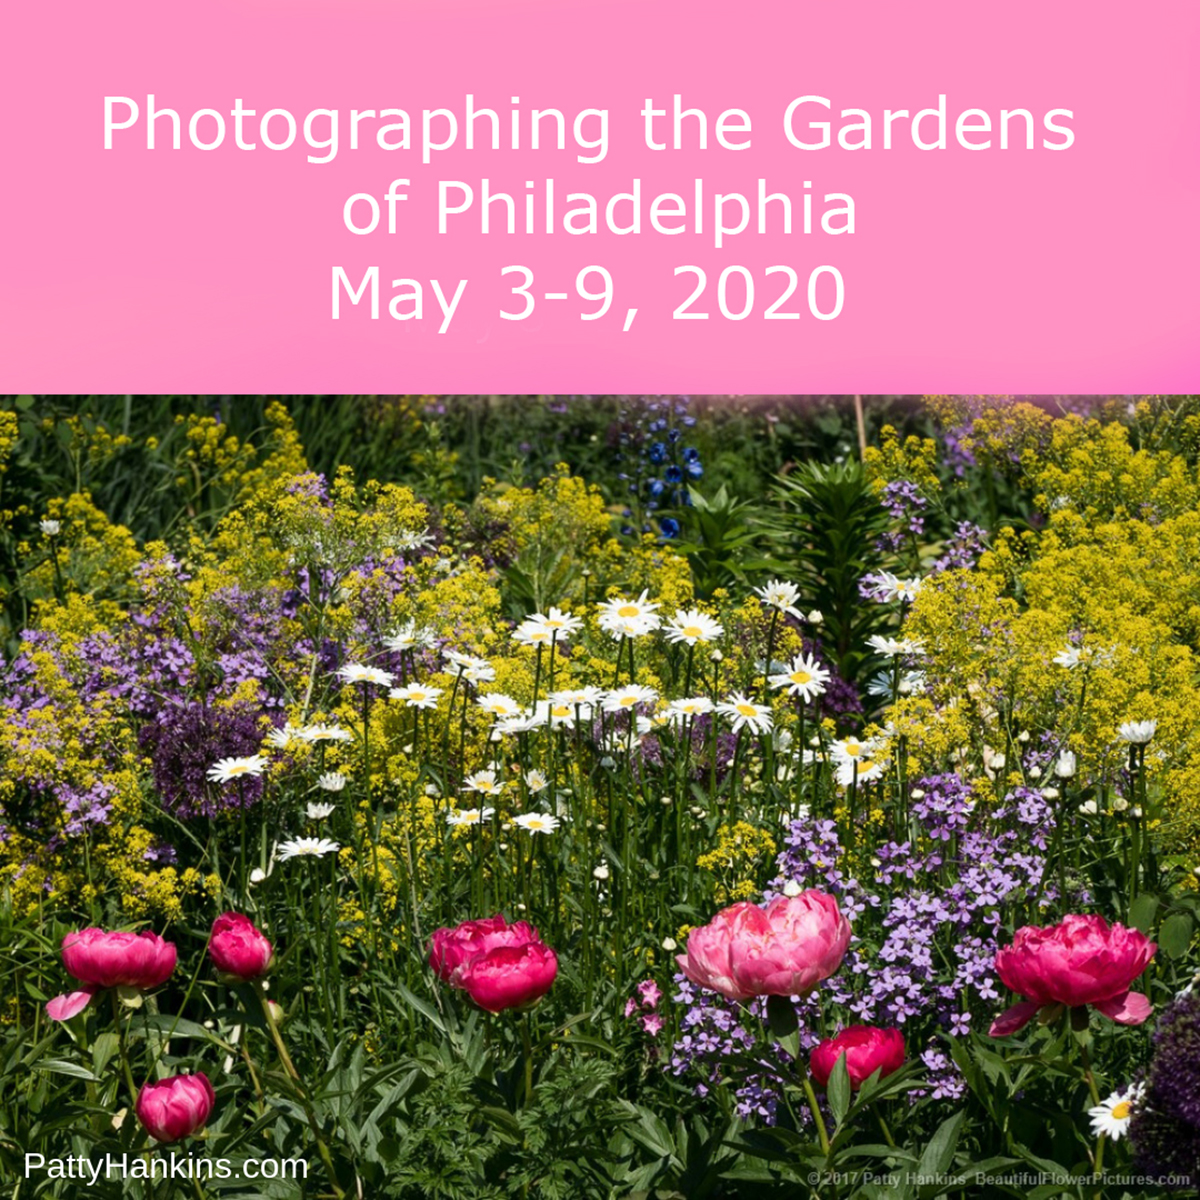 Come Photograph the Gardens of Philadelphia with me in May